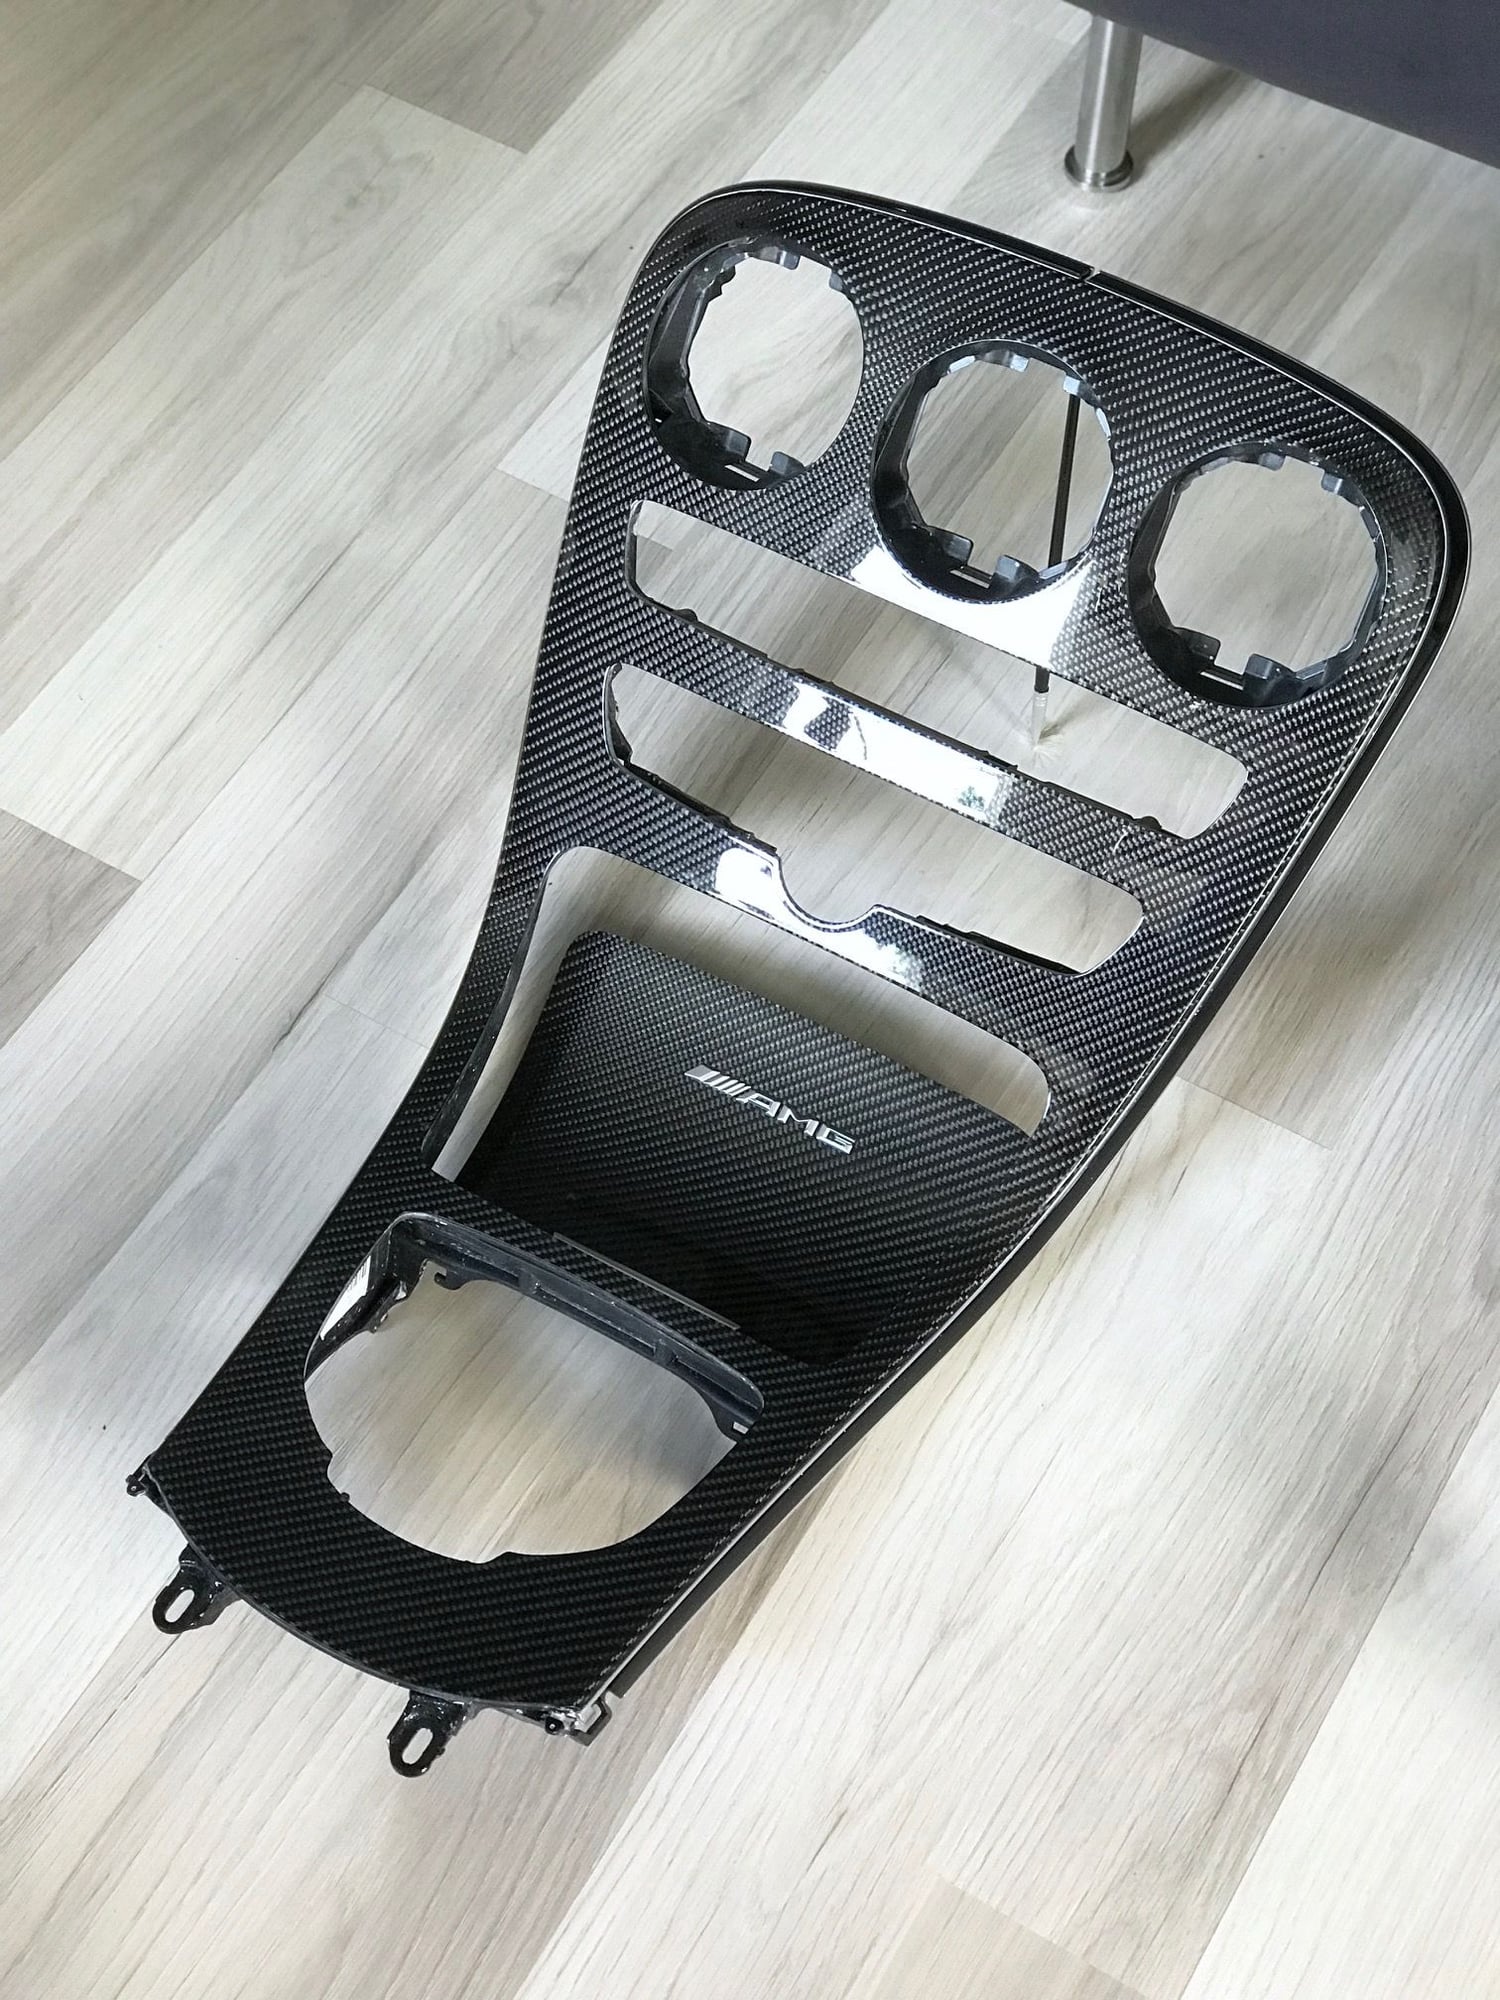 Interior/Upholstery - OEM Carbon fibre center console for W205 C63 - Used - 2015 to 2019 Mercedes-Benz C63 AMG S - 2015 to 2019 Mercedes-Benz C63 AMG - Kolobrzeg, Poland